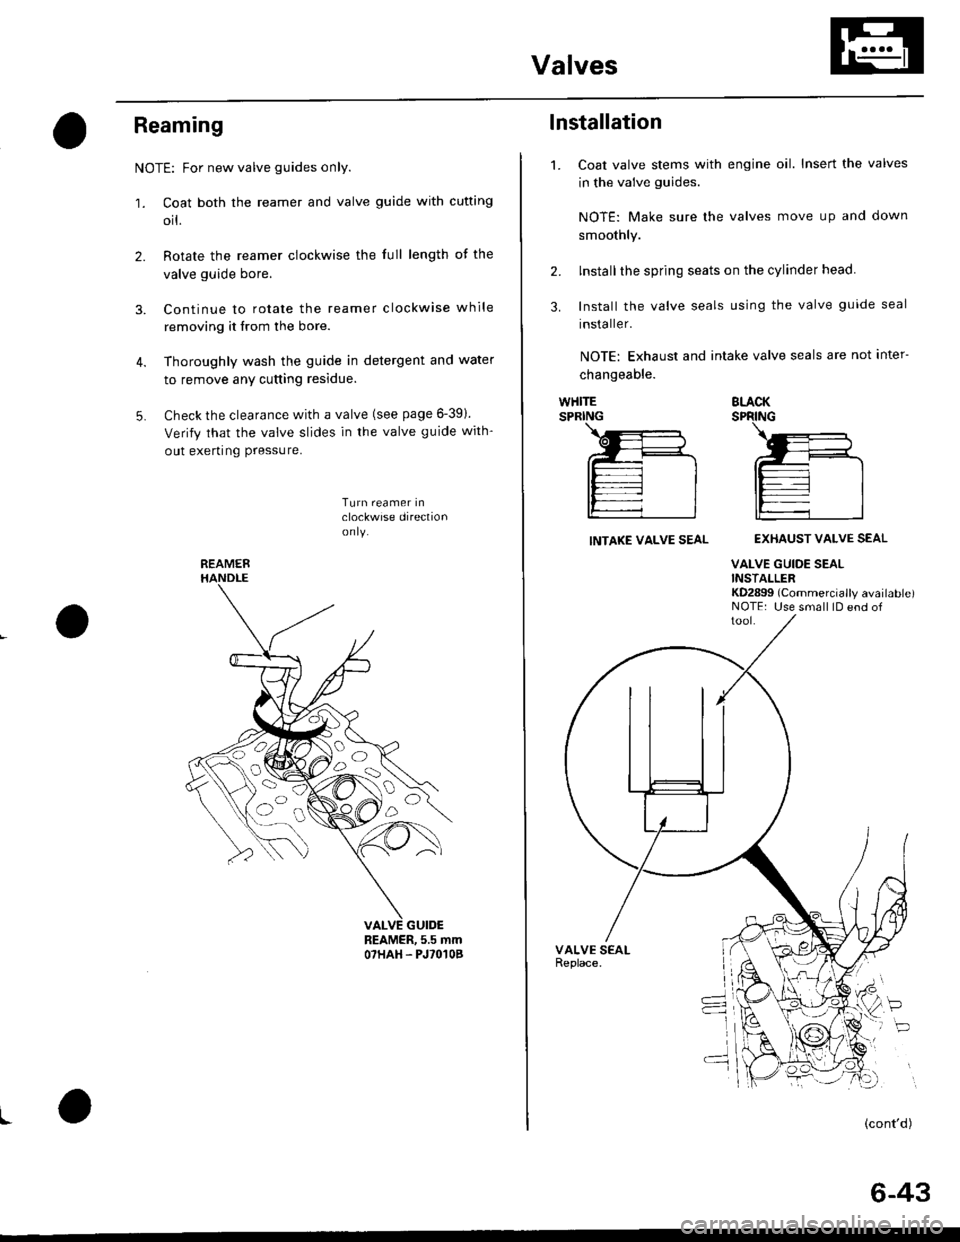 HONDA CIVIC 2000 6.G Workshop Manual Valves
Reaming
NOTE: For new valve guides only.
1. Coat both the reamer and valve guide with cufting
orl.
2. Rotate the reamer clockwise the full length of the
valve guide bore.
3. Continue to rotate 